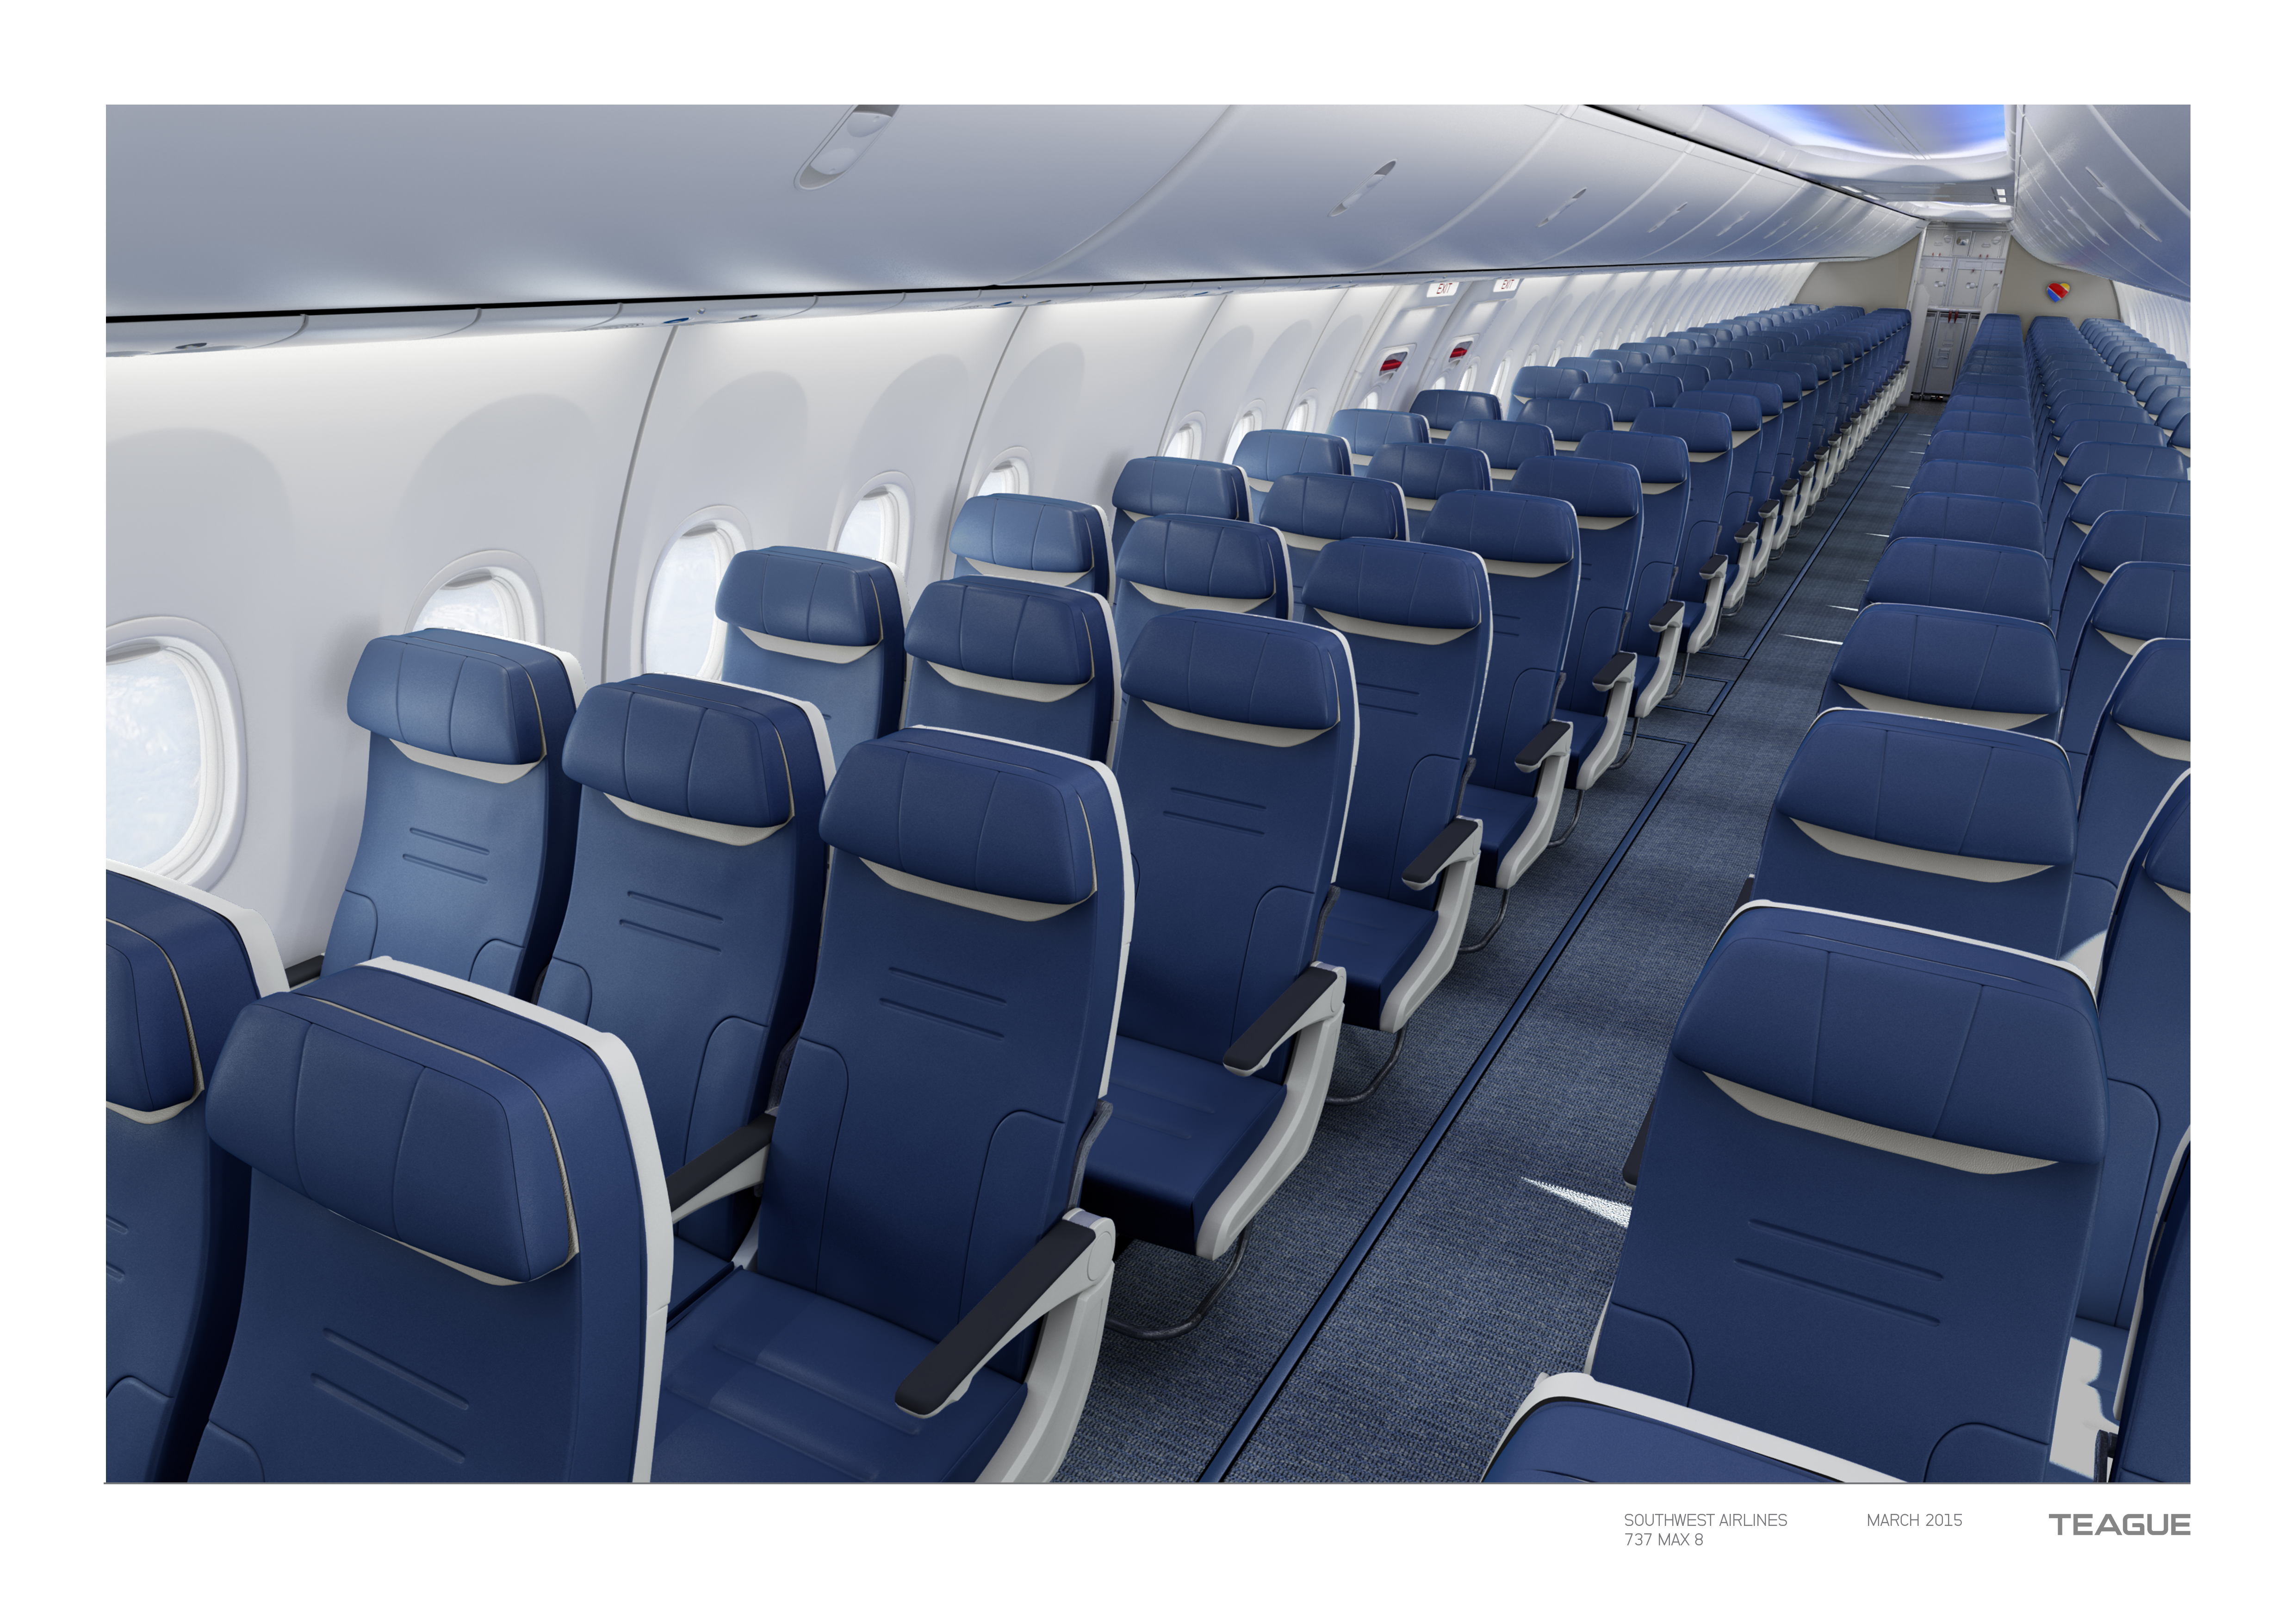 Guide To Getting A Good Seat Flying On Southwest Airlines